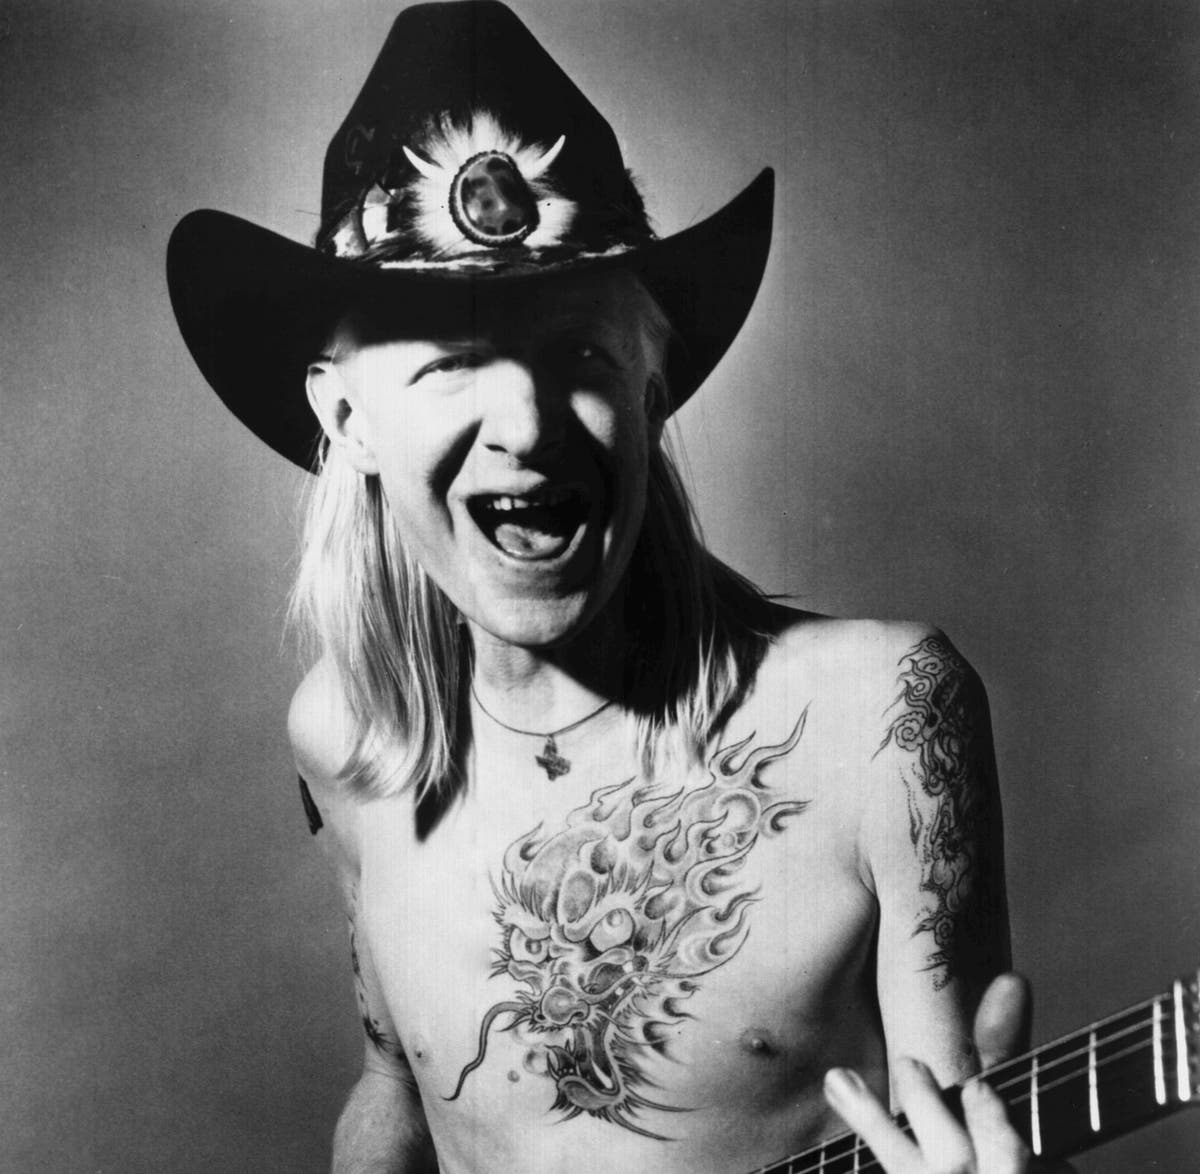 Download Johnny Winter Blues Musician Who Inspired John Lennon Mick Jagger And Keith Richards Dies Aged 70 The Independent The Independent